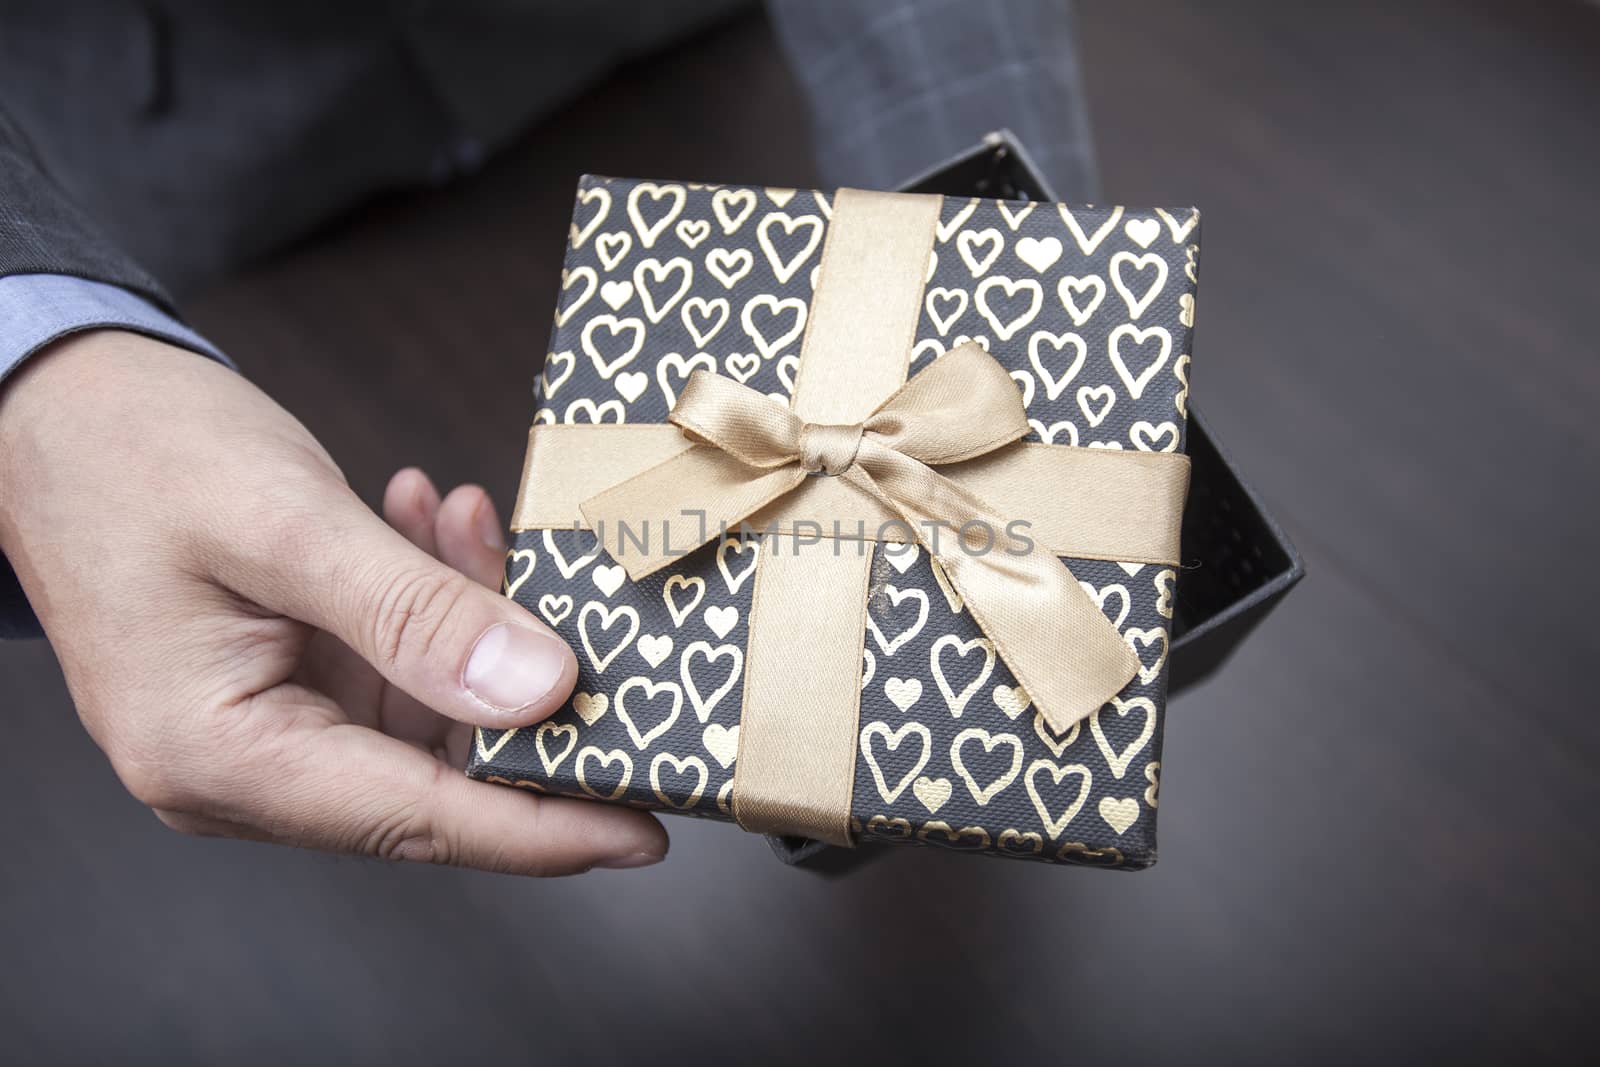 Man's hands keep a half open box in a business suit wrapped up by a bow